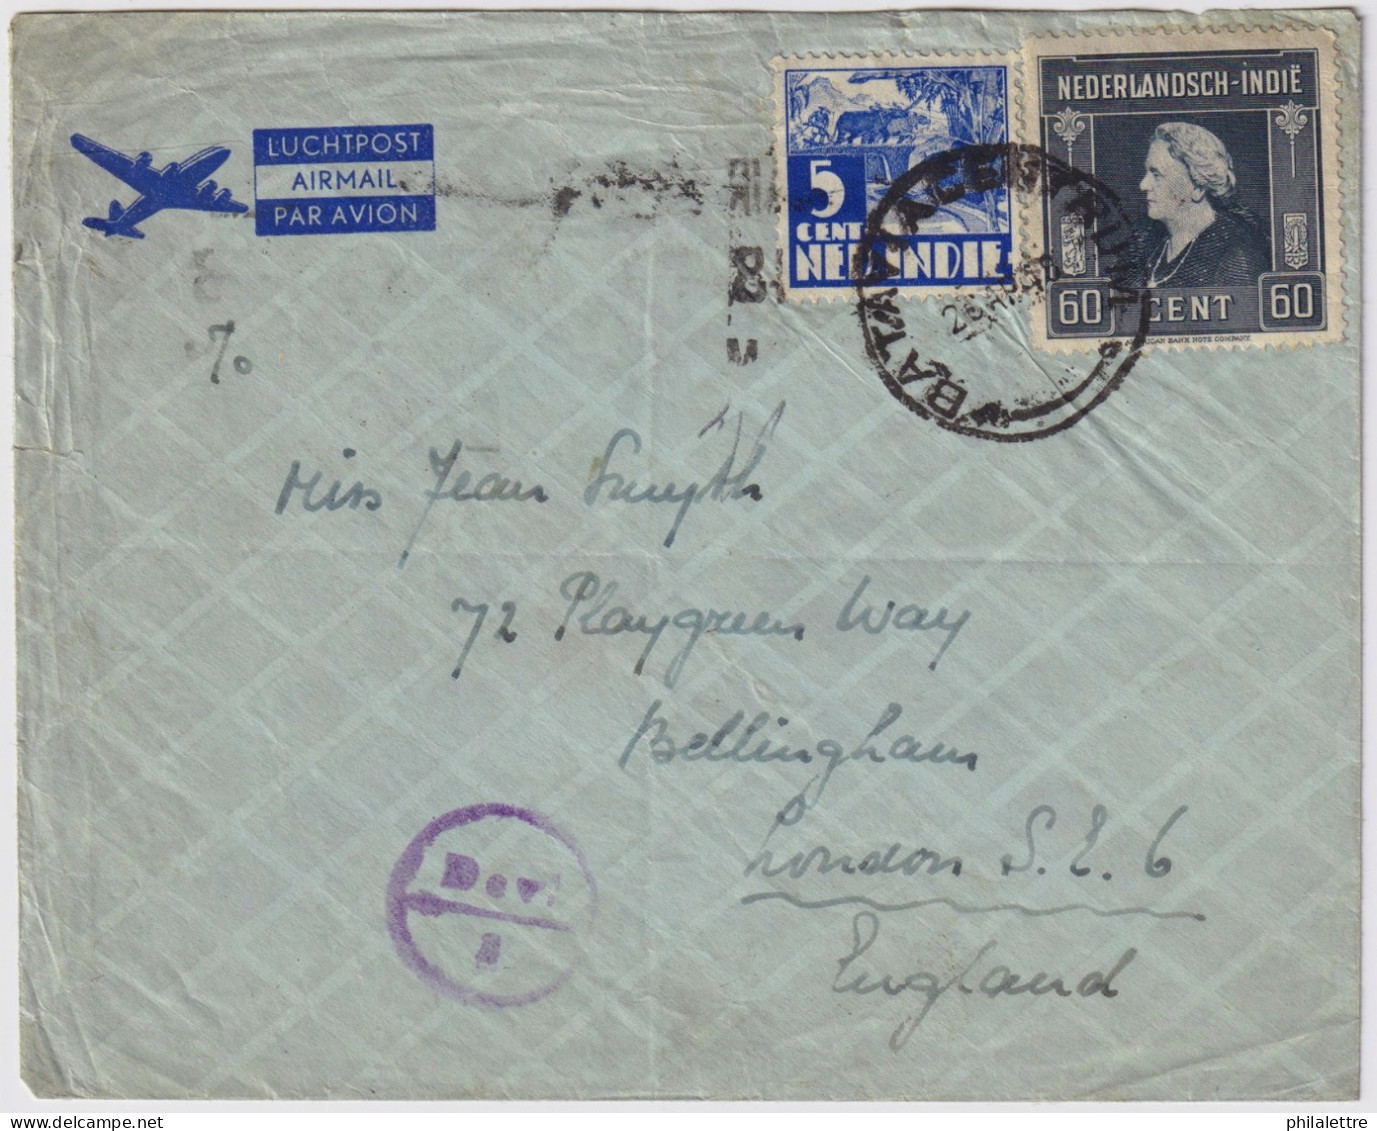 INDES NÉERLANDAISES / DUTCH EAST INDIES - 1948 Air Mail Cover From BATAVIA To London - "DEV. / 2" Currency Control Mark - Netherlands Indies